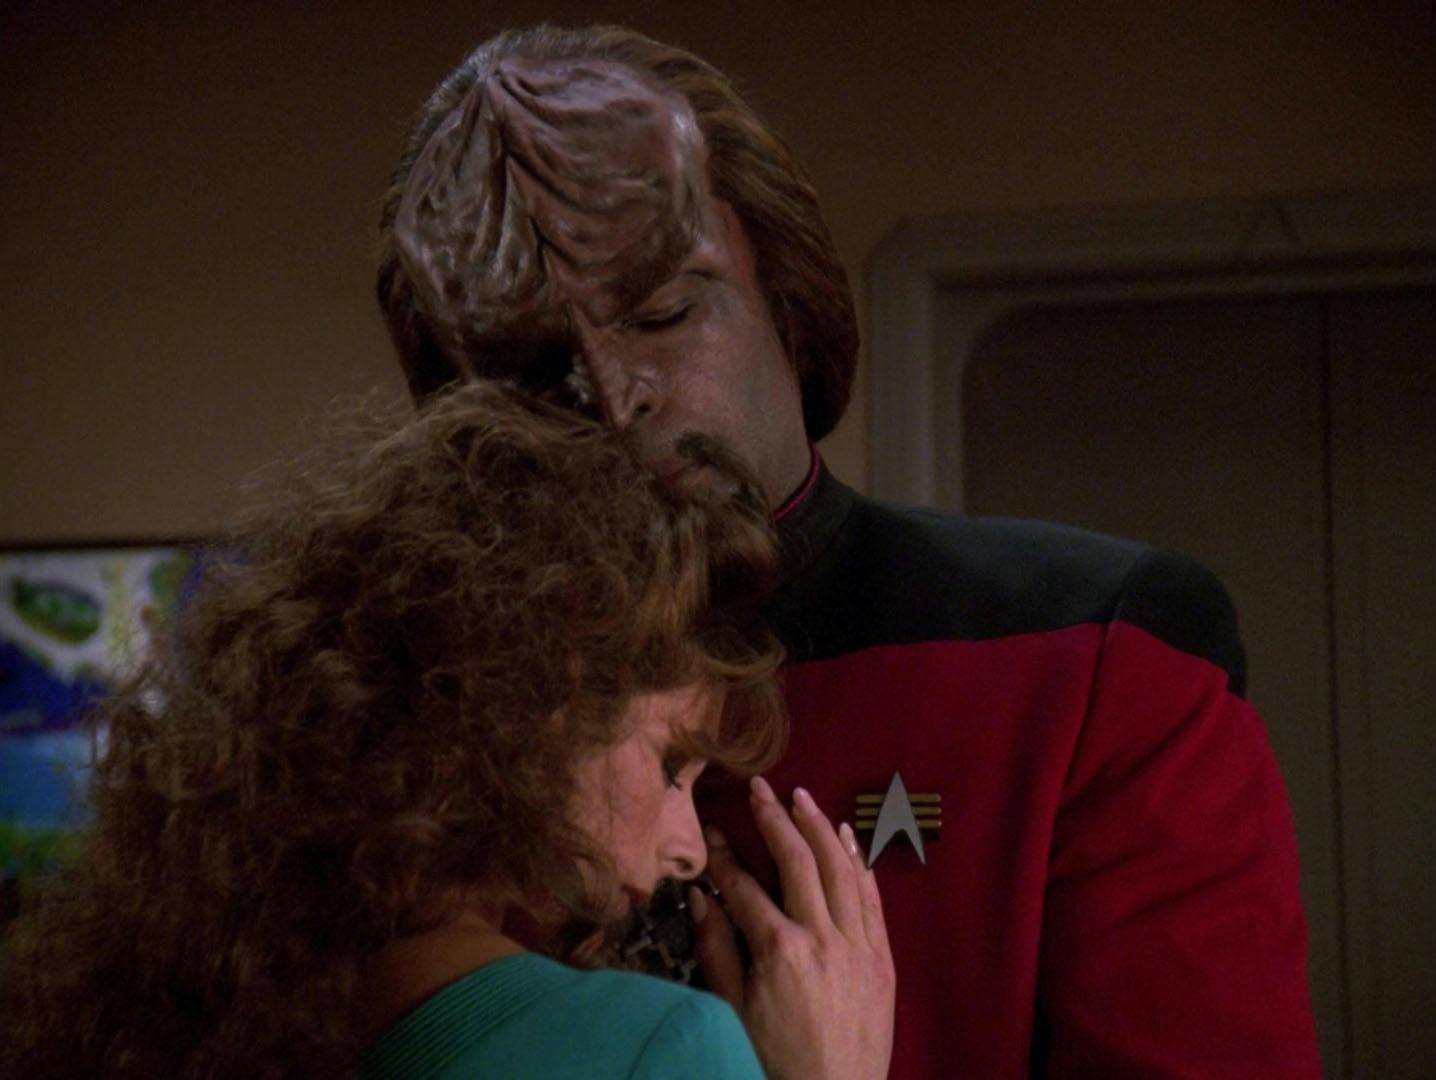 Worf holds Deanna Troi in a warm embrace as he rests gently on her head in 'Parallels'